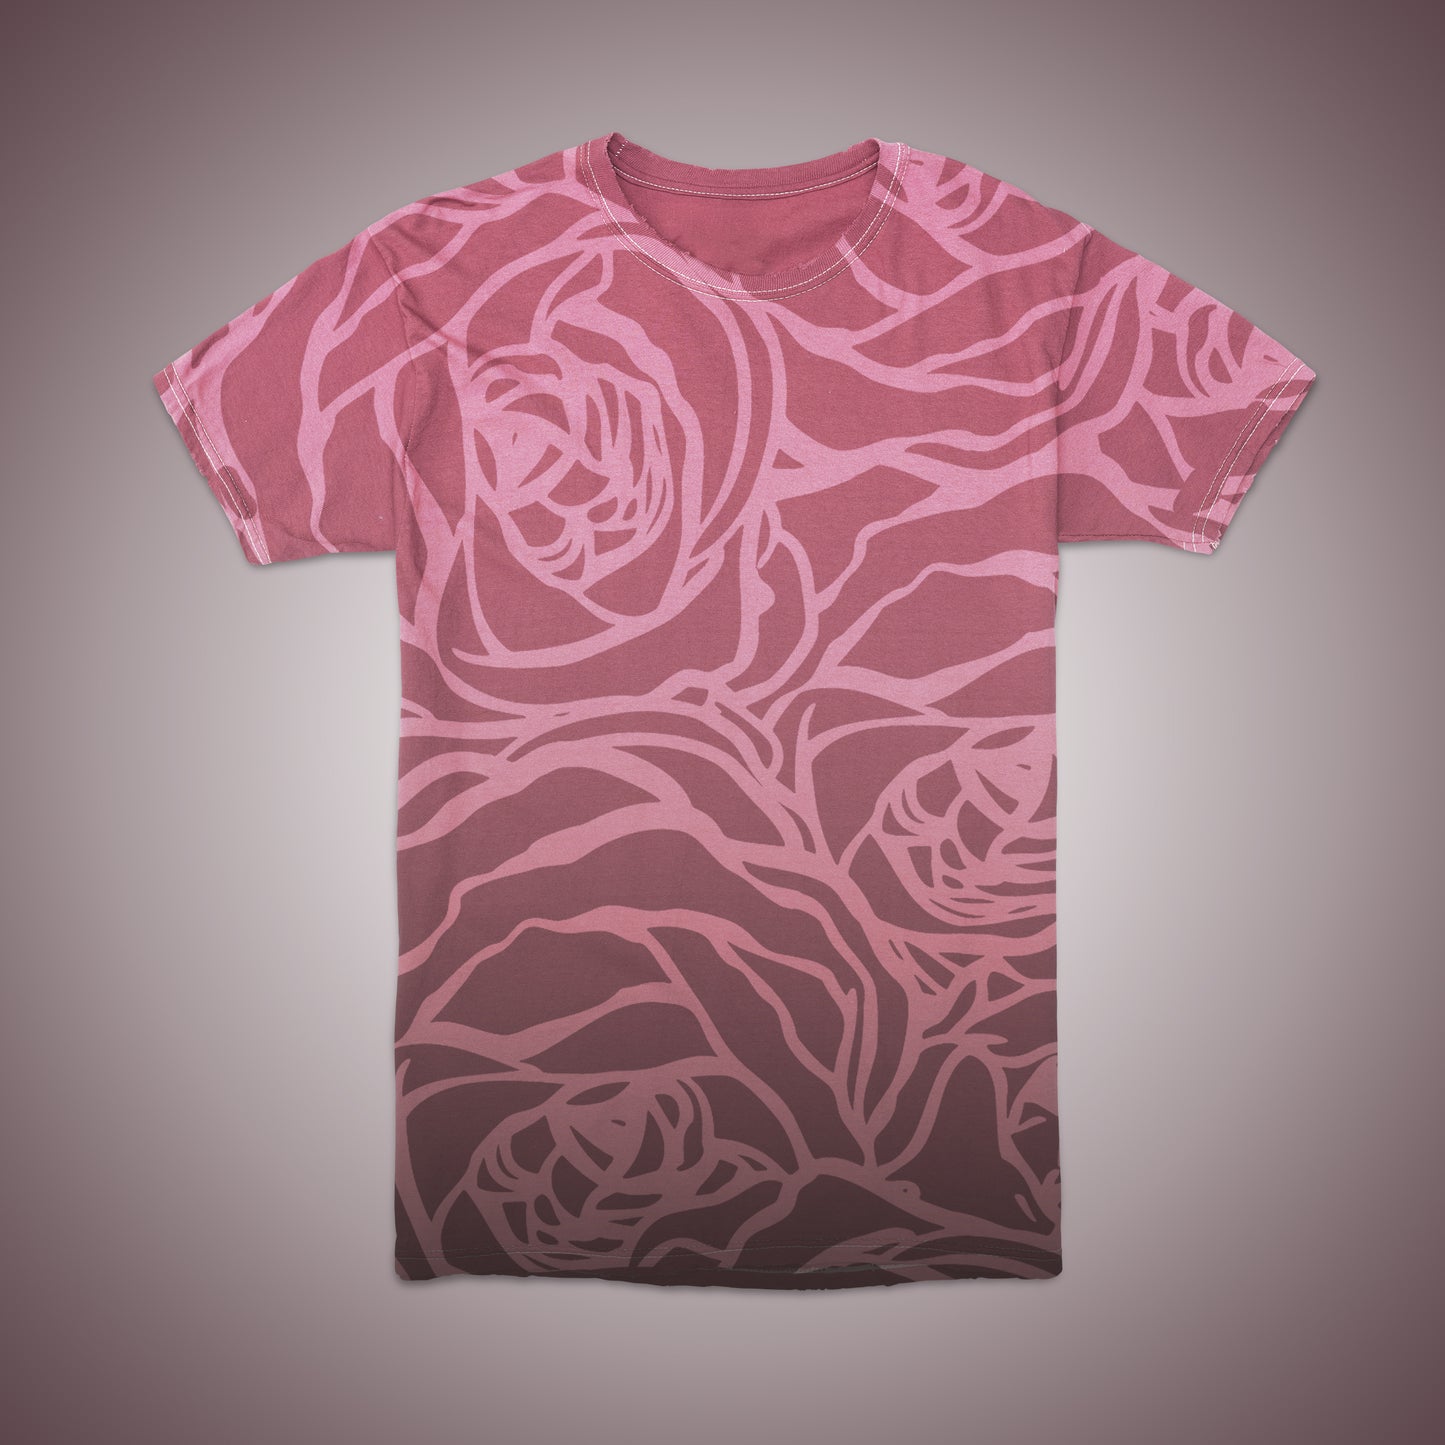 Limited Edition Future Vintage Tee: "Bed of Roses"